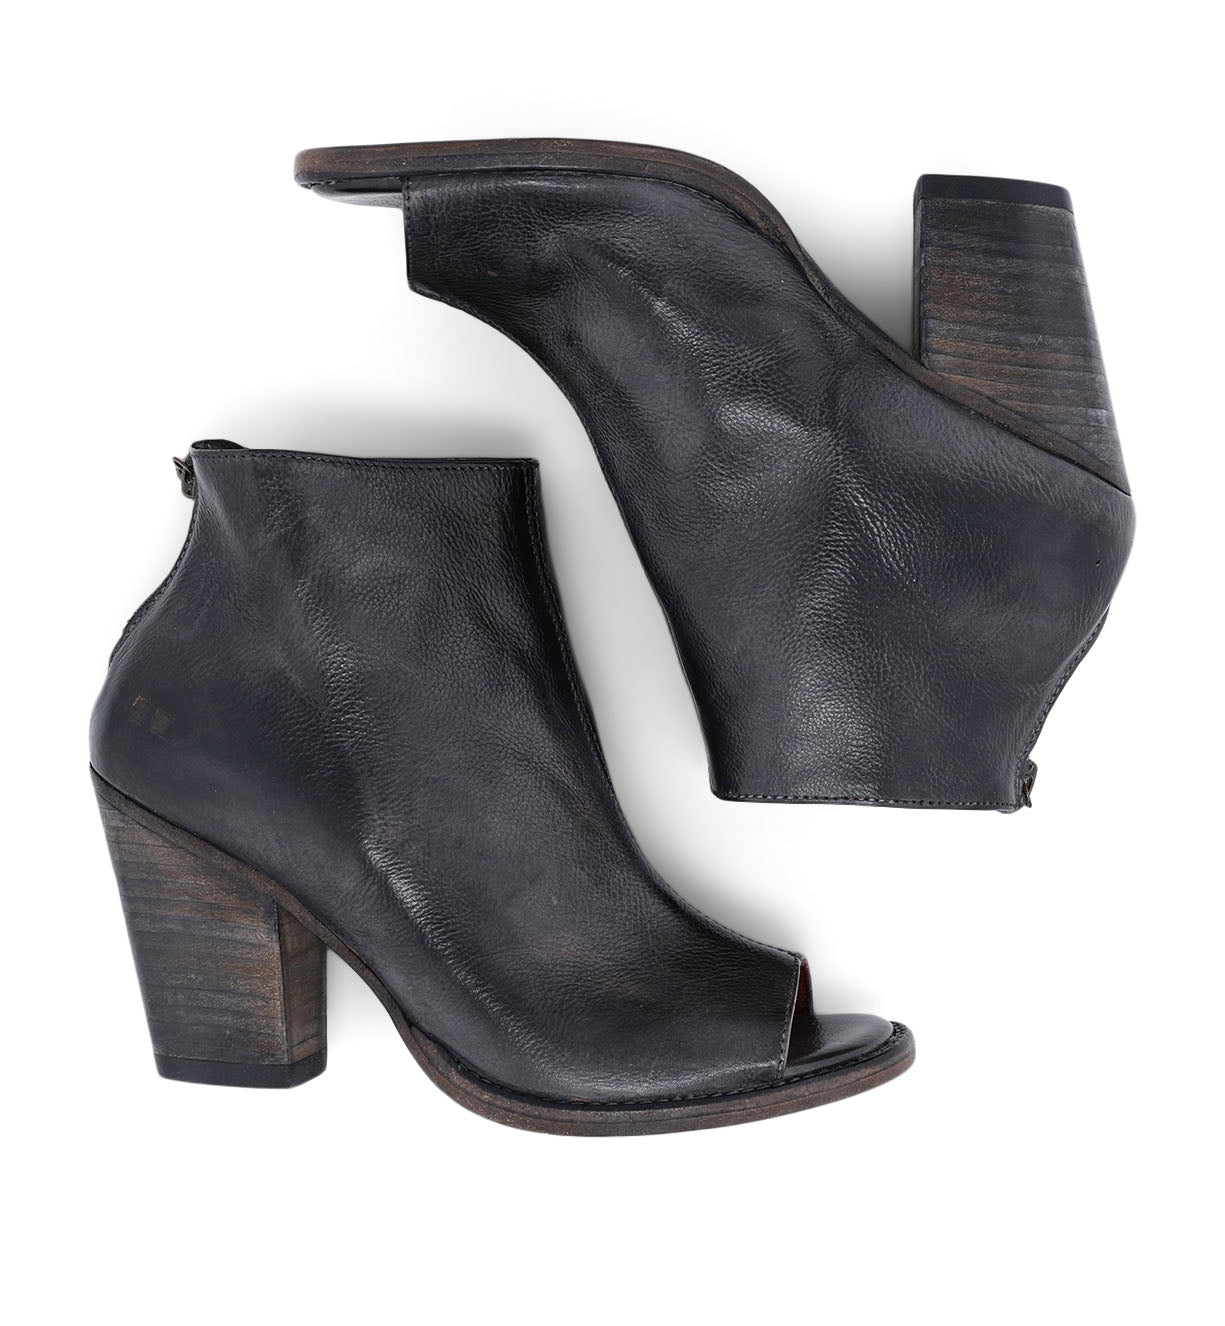 A pair of Bed Stu Onset black leather ankle boots with a wooden heel.